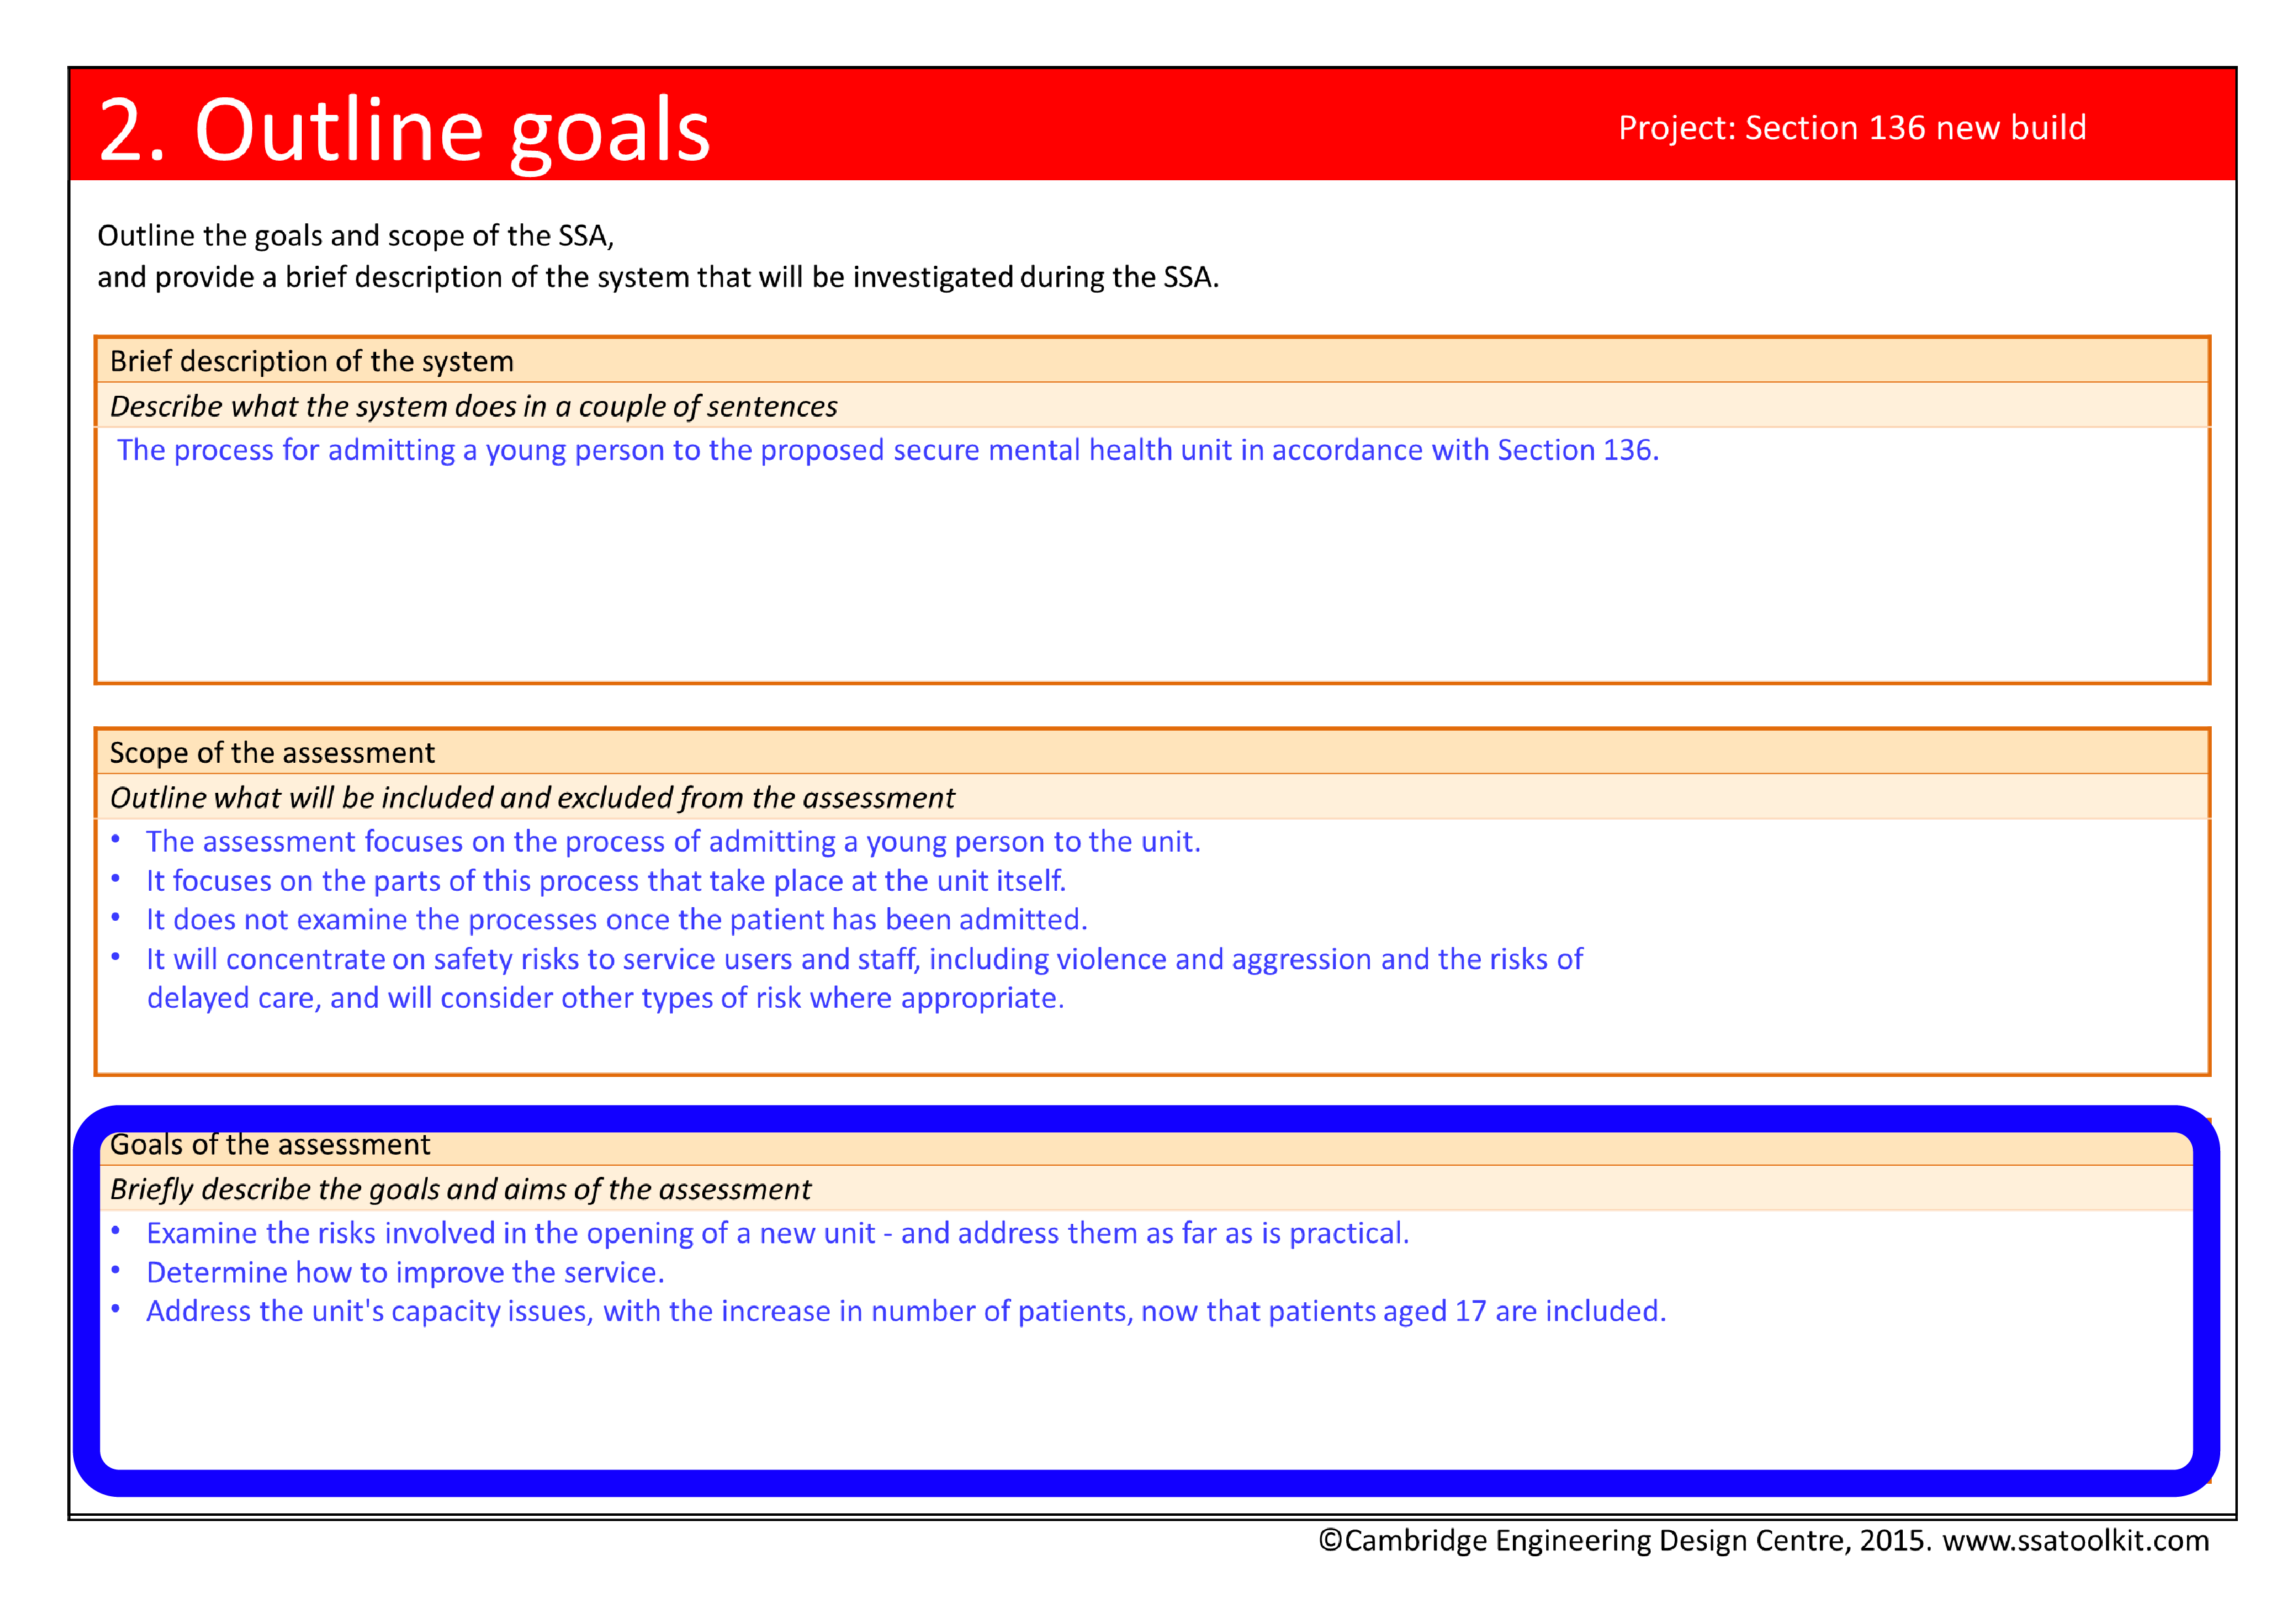 Screenshot of the Outline goals page from the Section 136 case study. The full form in pdf is available from the Resources page.